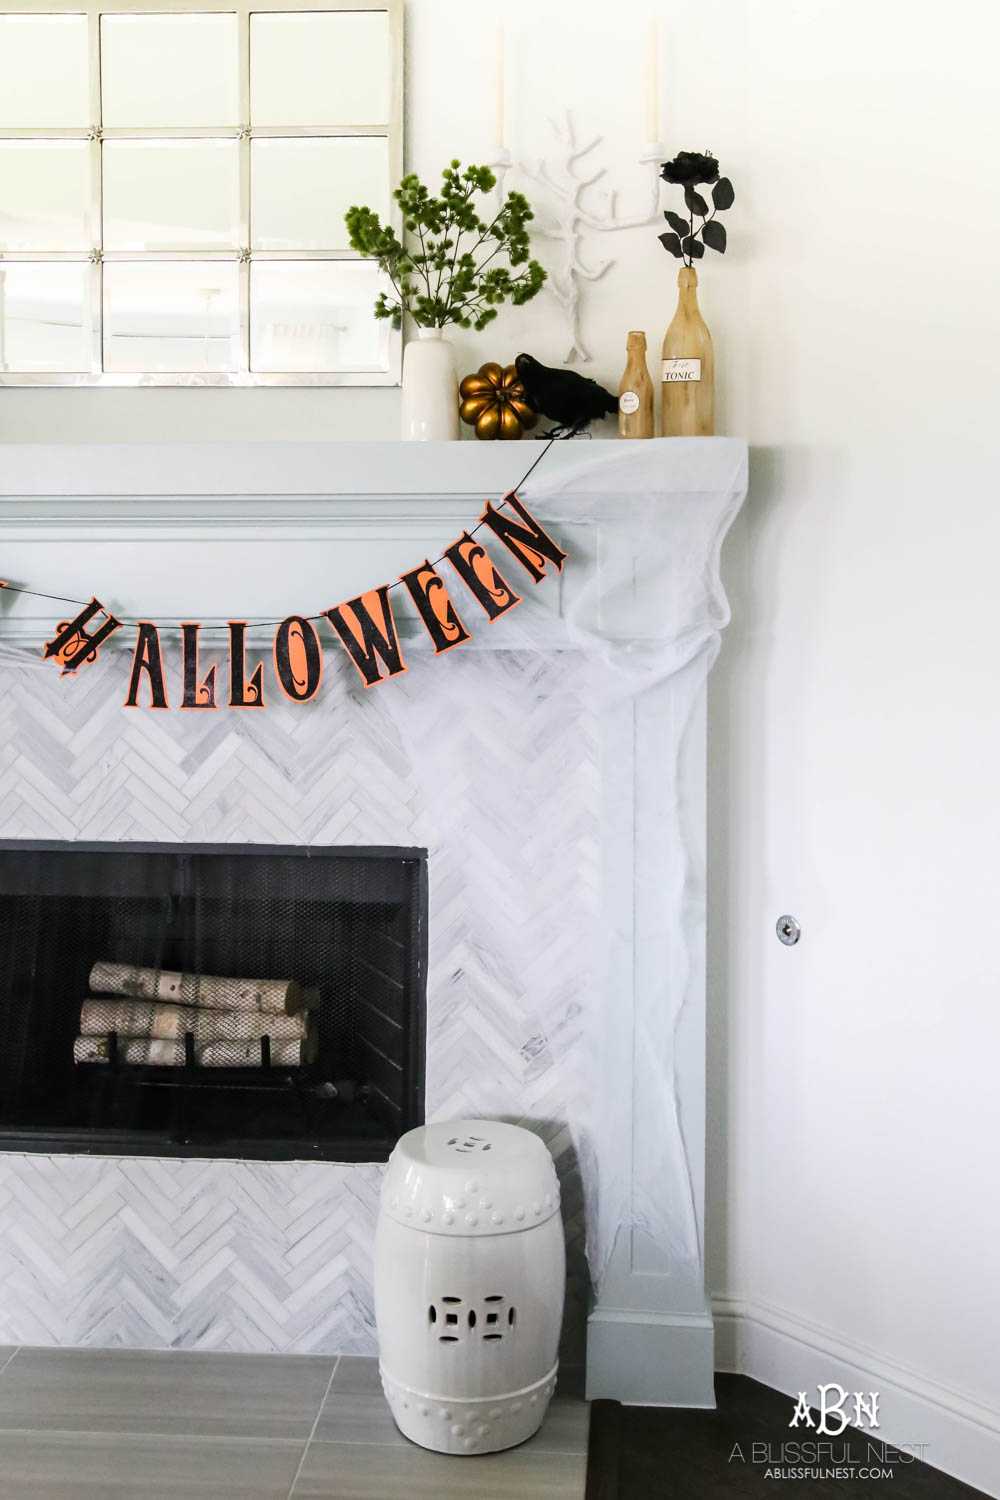 Tips and tricks to have your home ready for Halloween and the essential items you need to create a warm and inviting Halloween party. #ad #worldmarket #discoverworldmarket